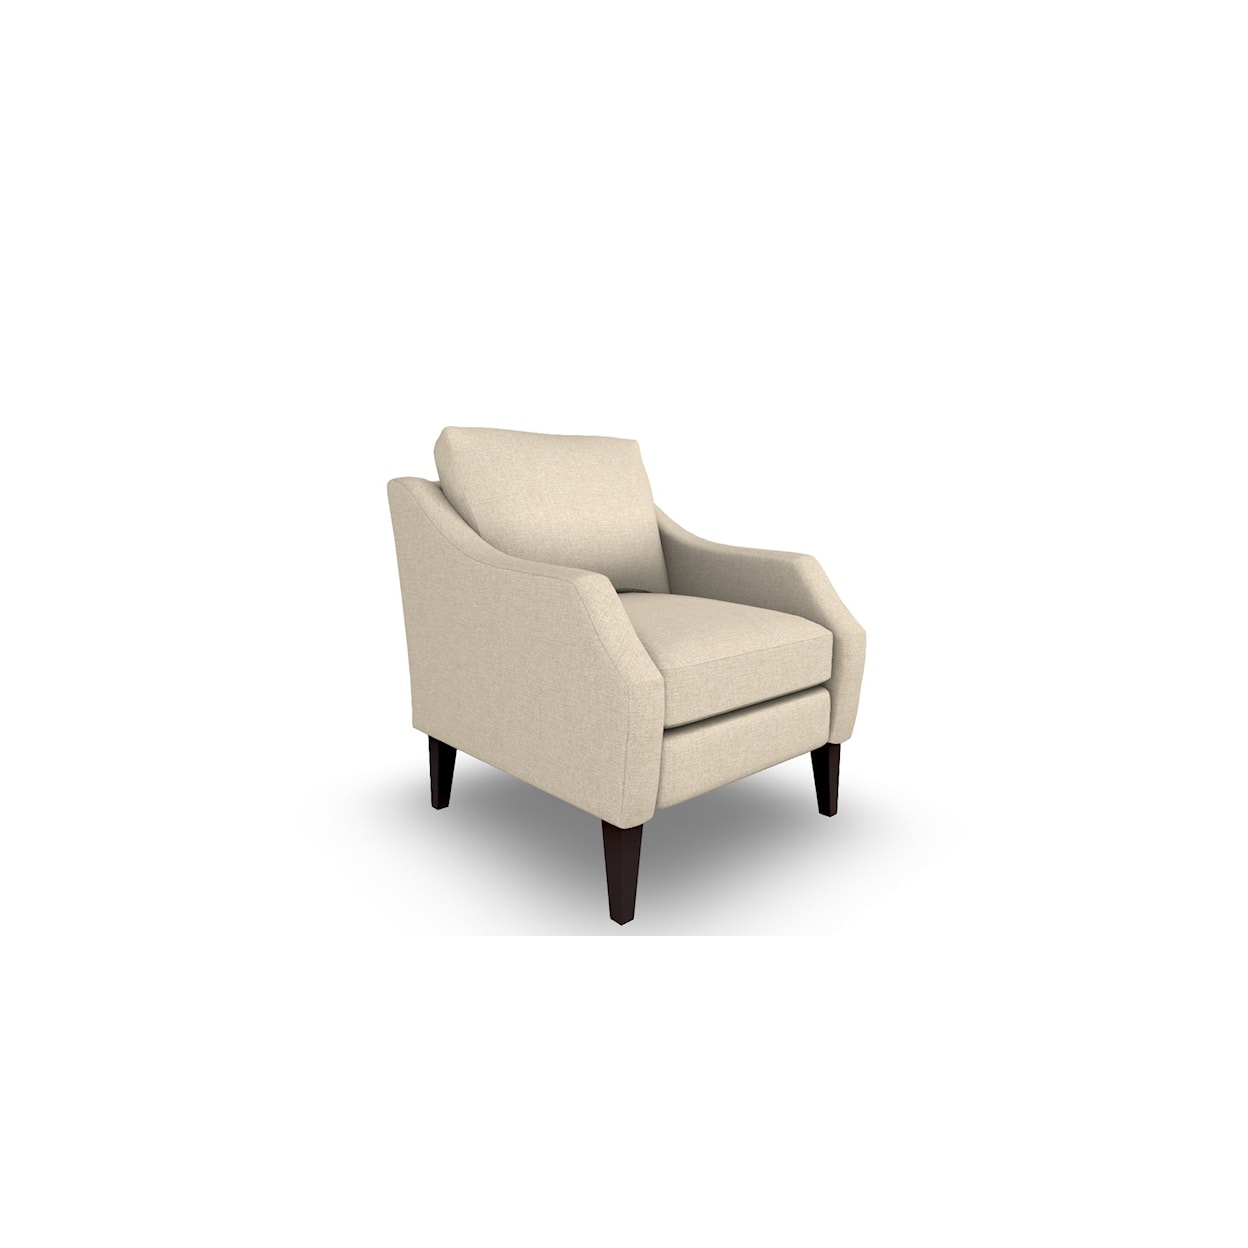 Bravo Furniture Syndicate Stationary Chair